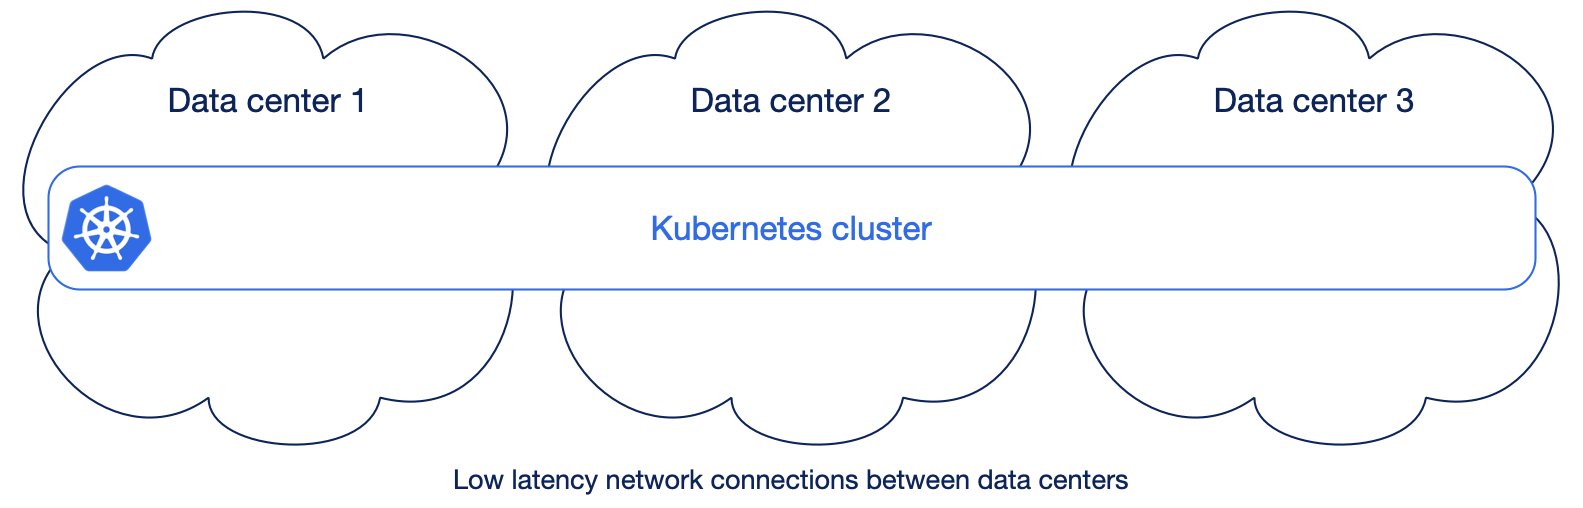 low latency network connections between data centers